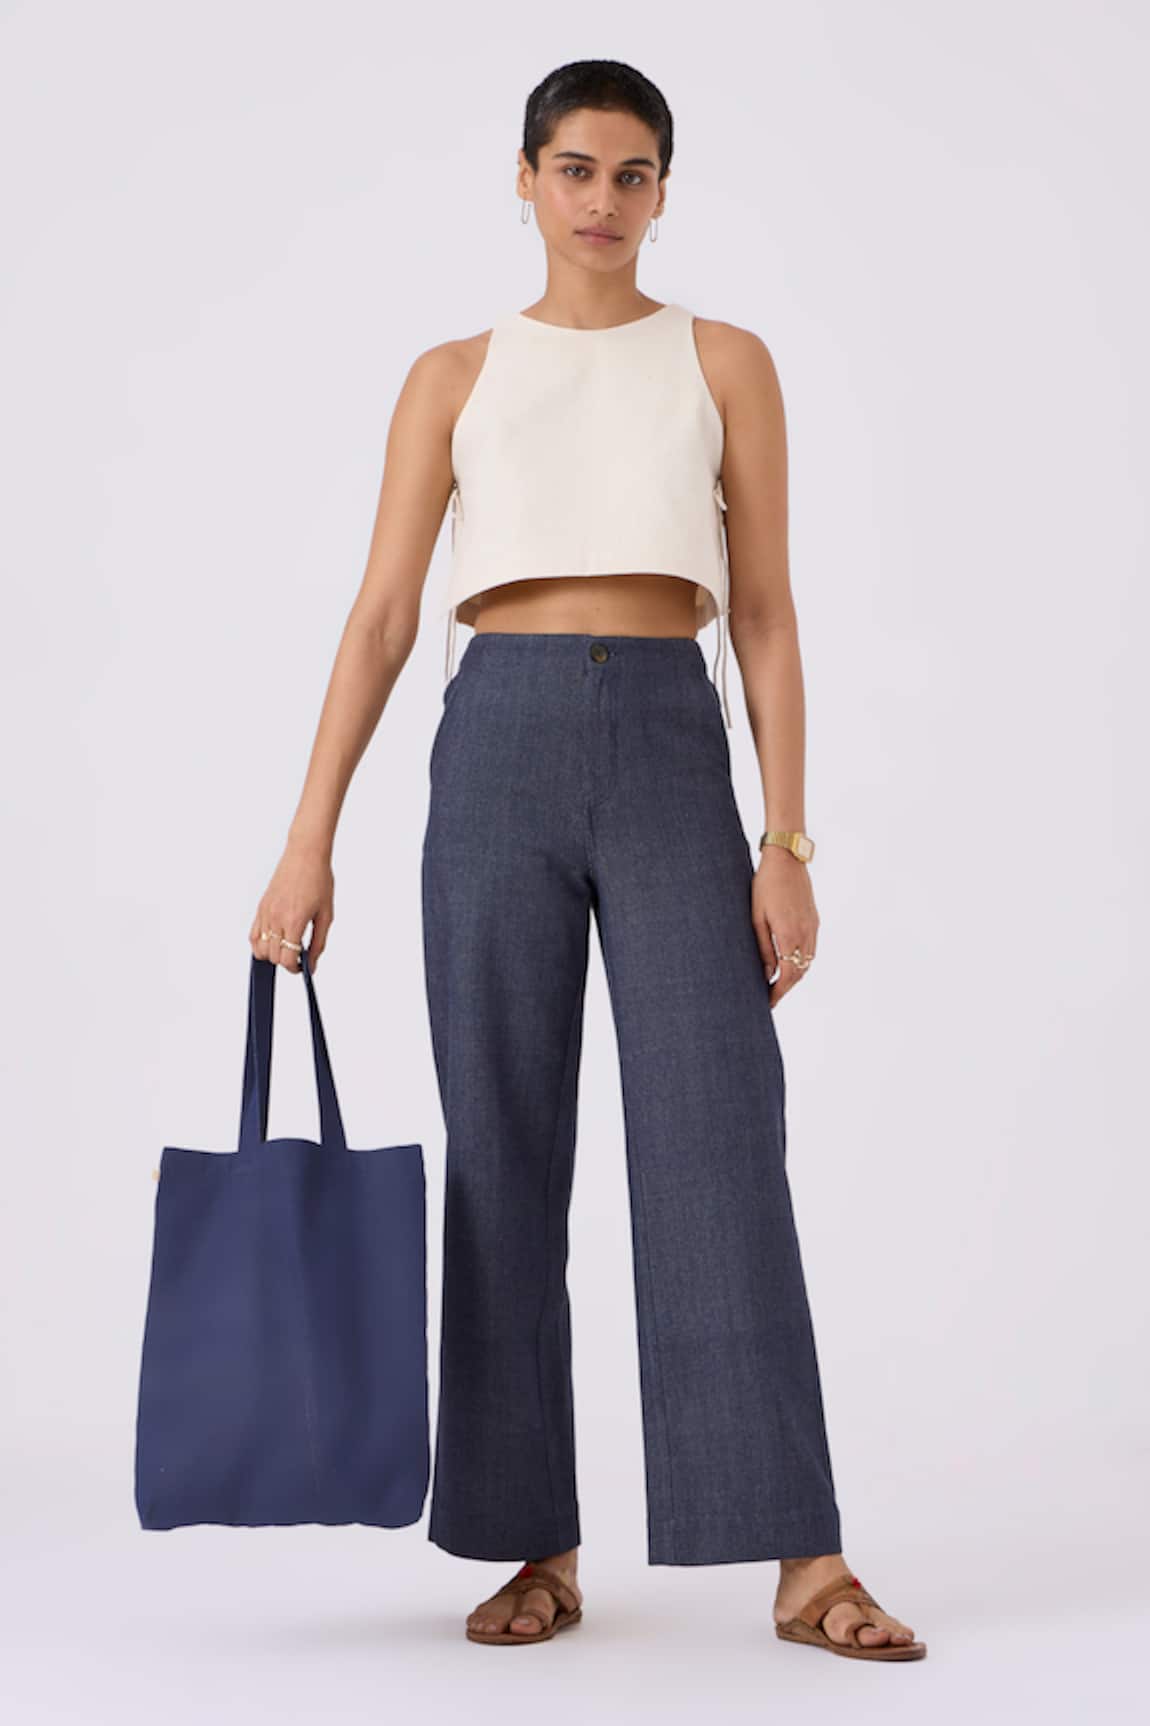 The Summer House Tia Cropped Khadi Tie Top